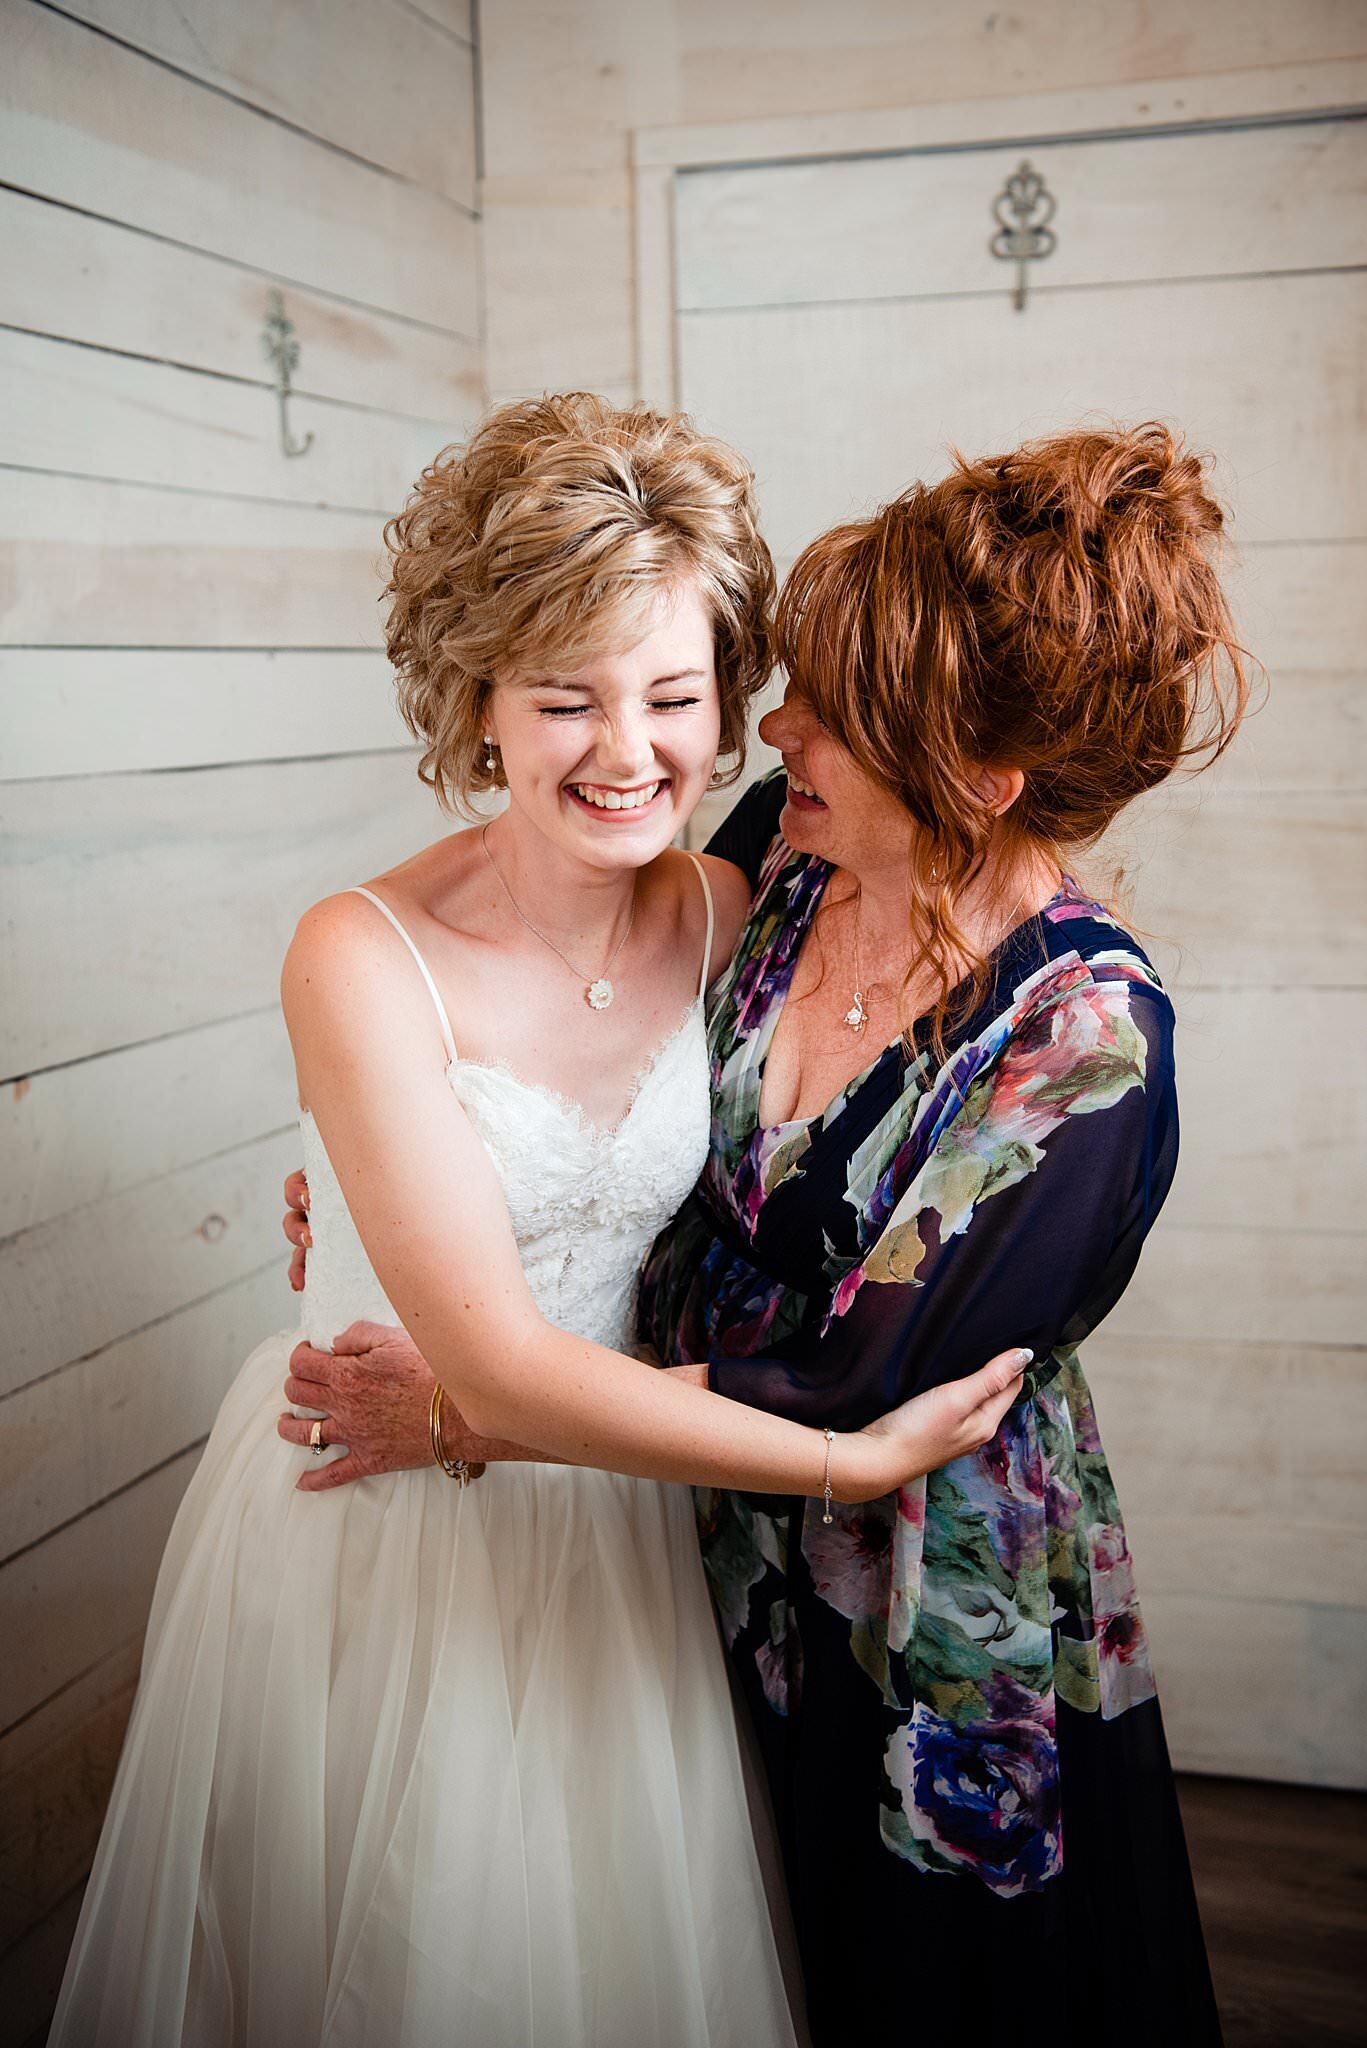 Bride laughing with her mother in the bridal suite at White Dove Barn